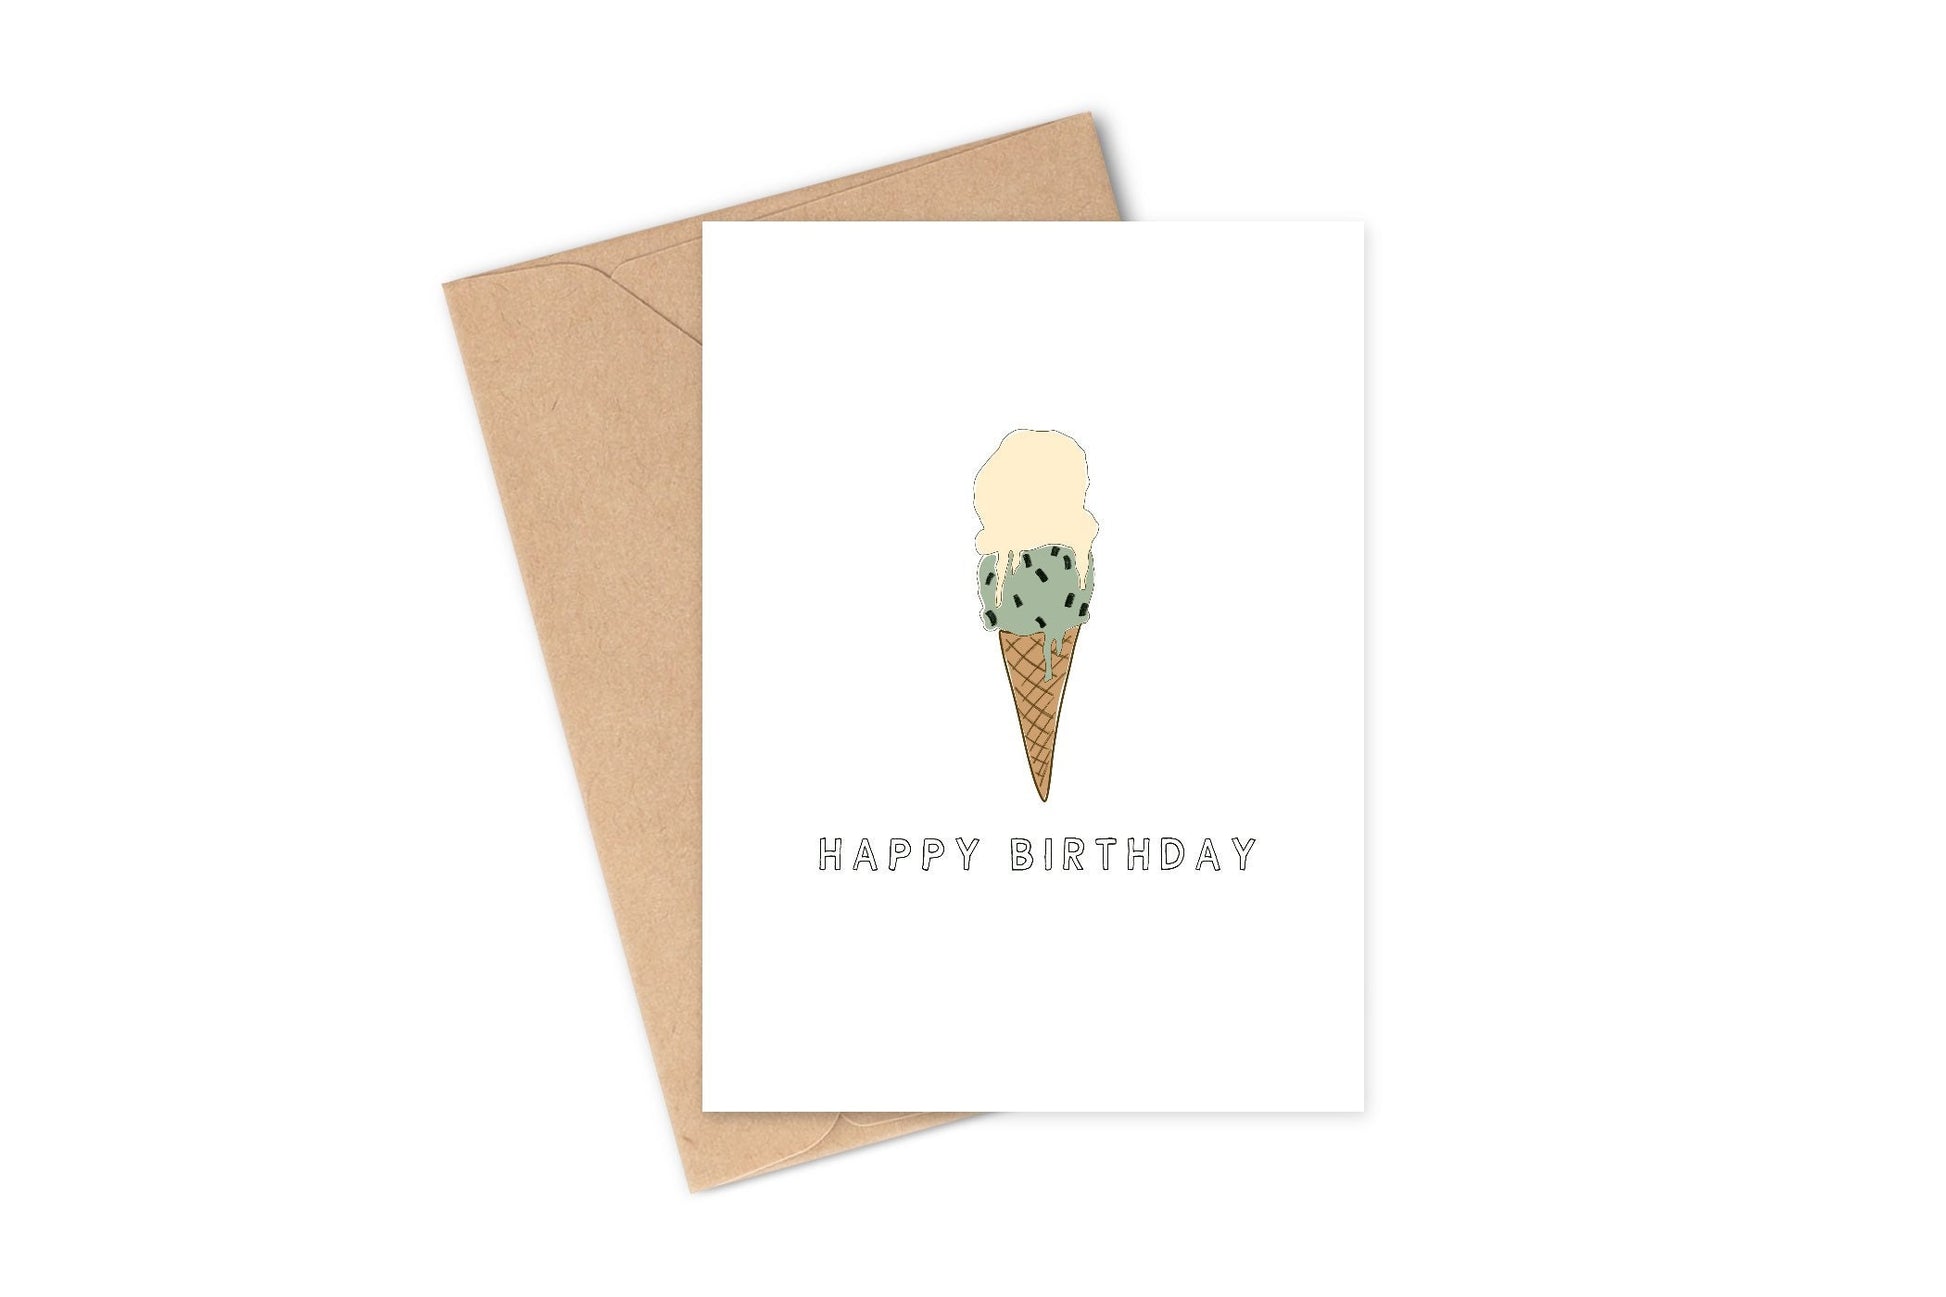 Nothing says Happy Birthday like a double scoop of ice cream! This cute ice cream "Happy Birthday" greeting card is the perfect way to send someone warm (or cold in this case) wishes on their special day! white background with a double scoop cone with mint and vanilla ice cream. It looks so delicious they're going to want to grab the cone right off of this card! Hurry and grab your today, before it melts!